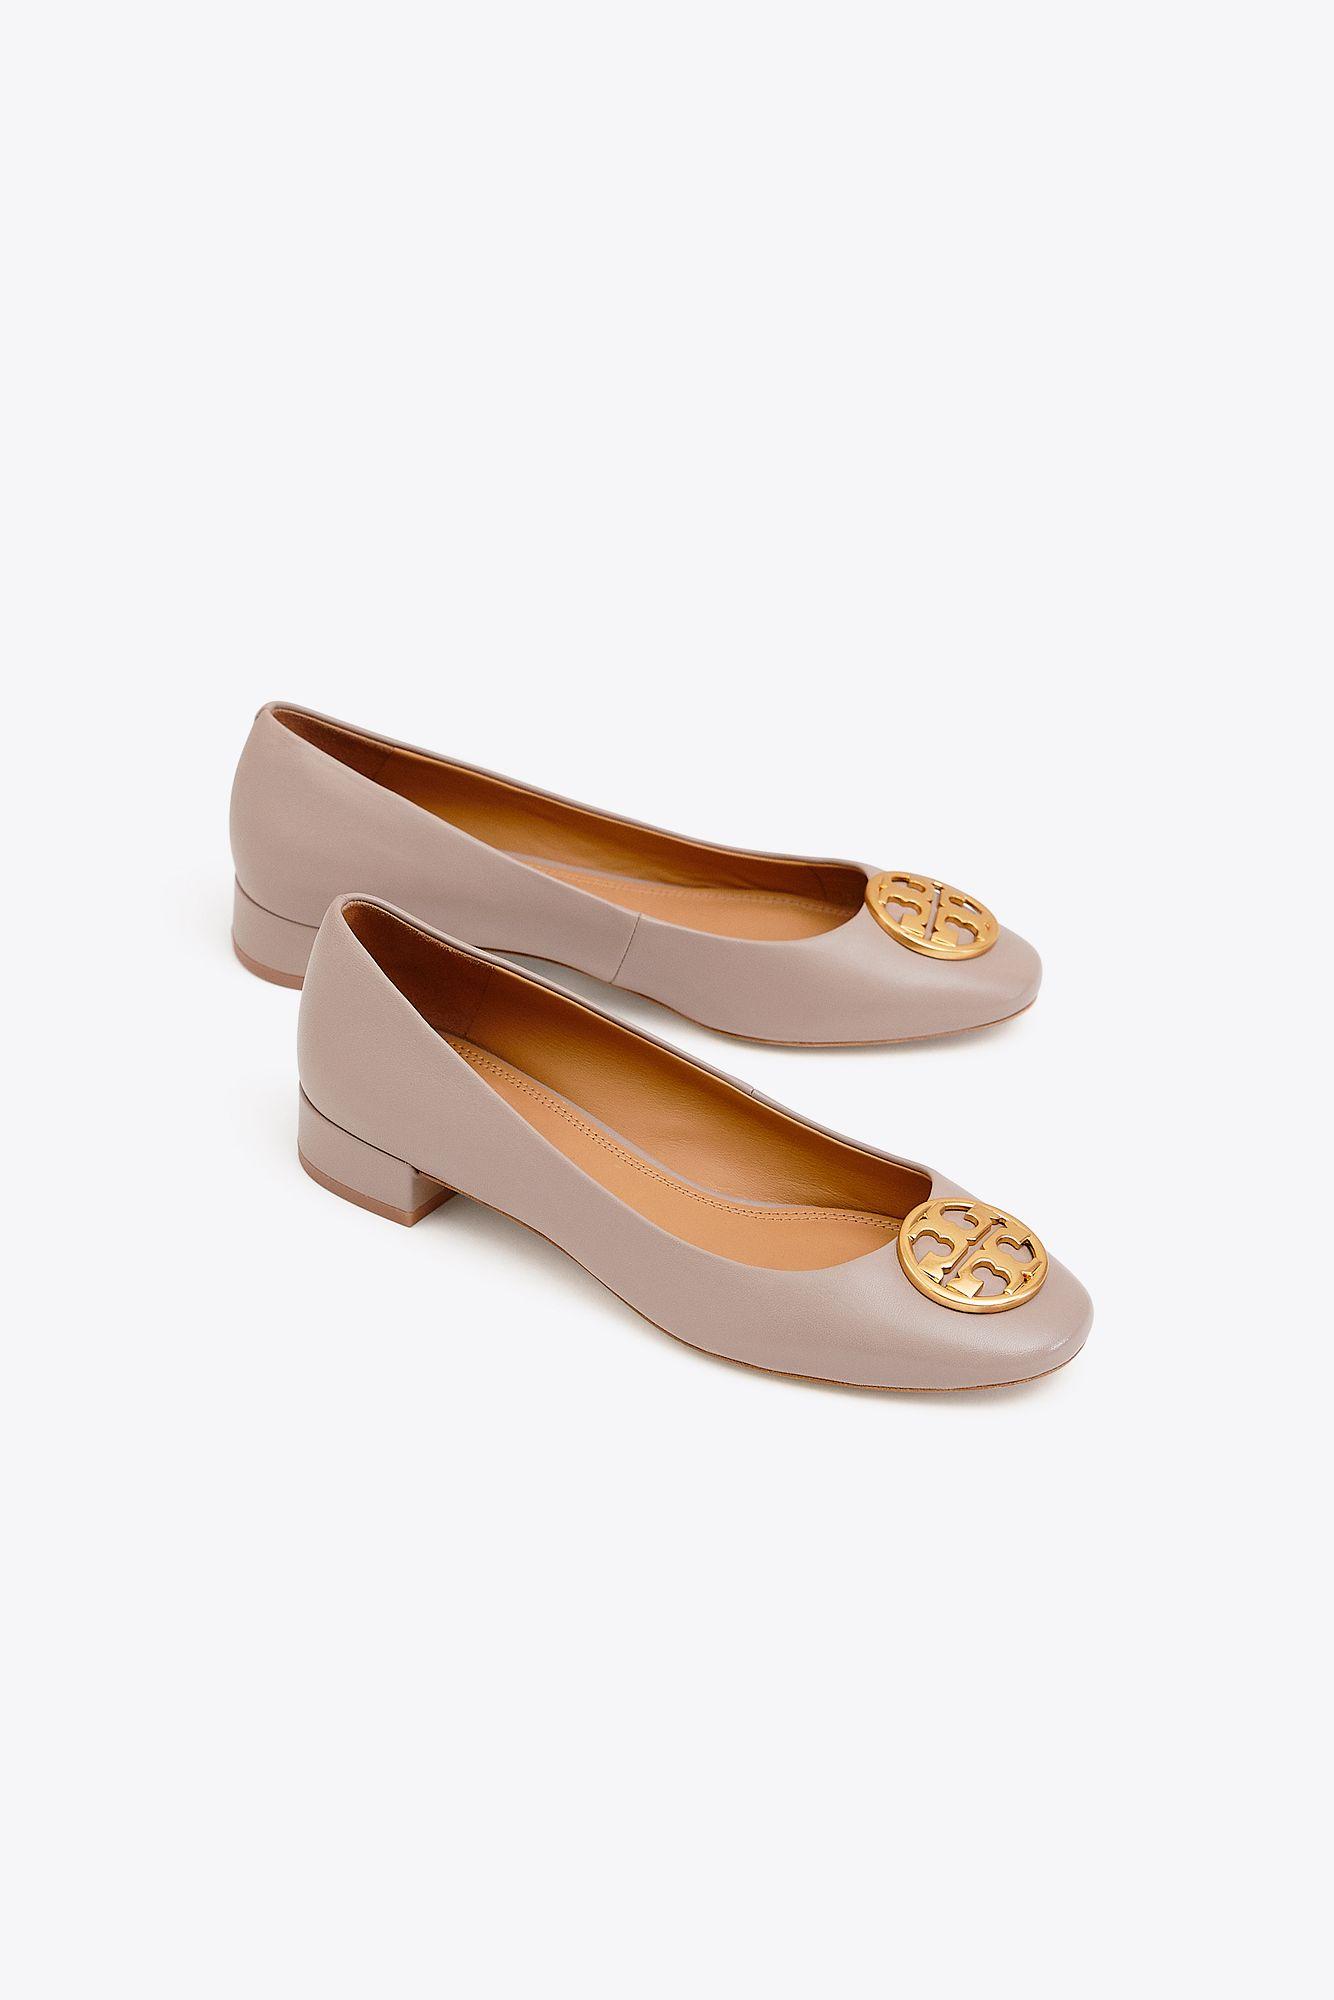 Tory Burch Leather Chelsea Heelsed Ballet Flats - Lyst